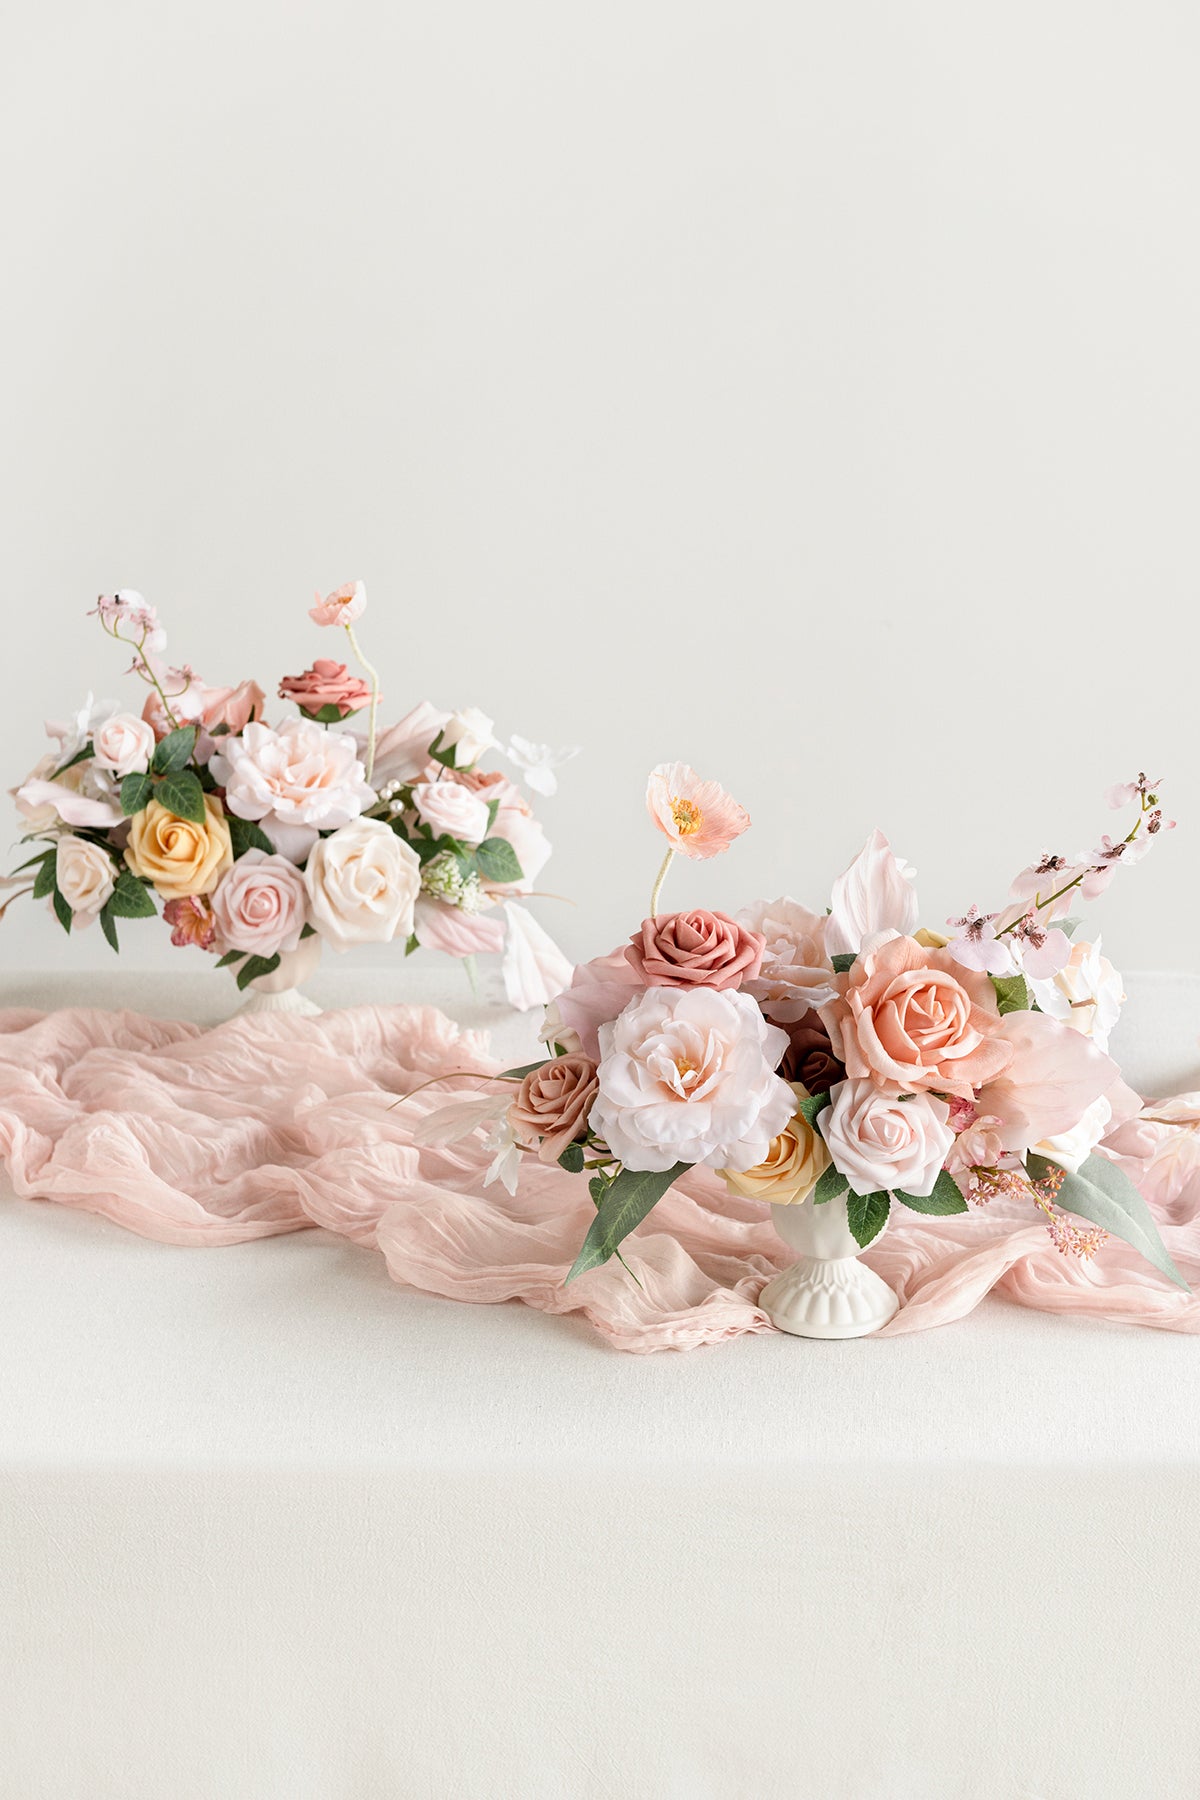 Large Floral Centerpiece Set in Blush Coral